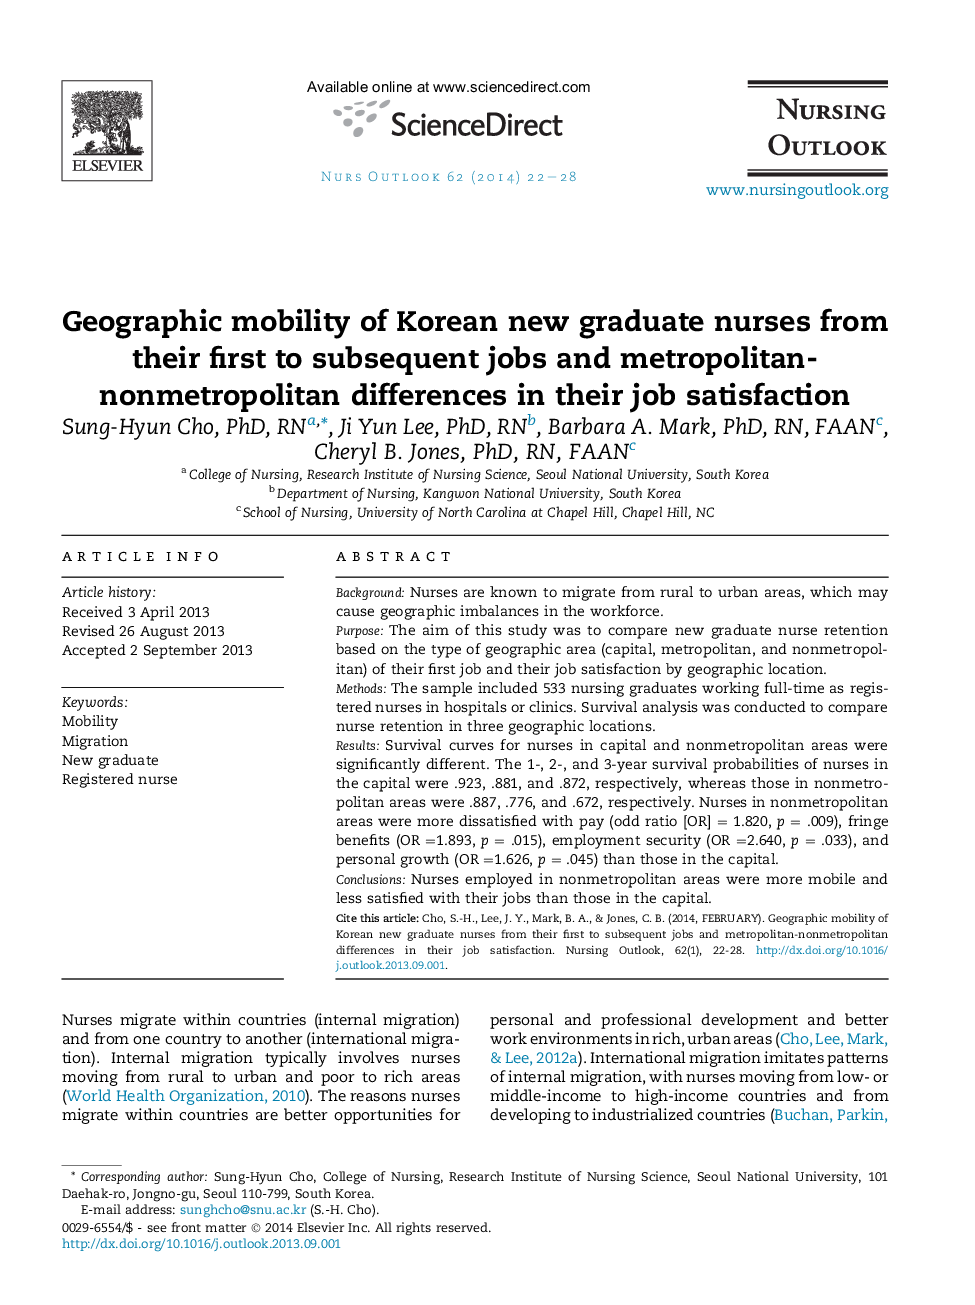 Geographic mobility of Korean new graduate nurses from their first to subsequent jobs and metropolitan-nonmetropolitan differences in their job satisfaction